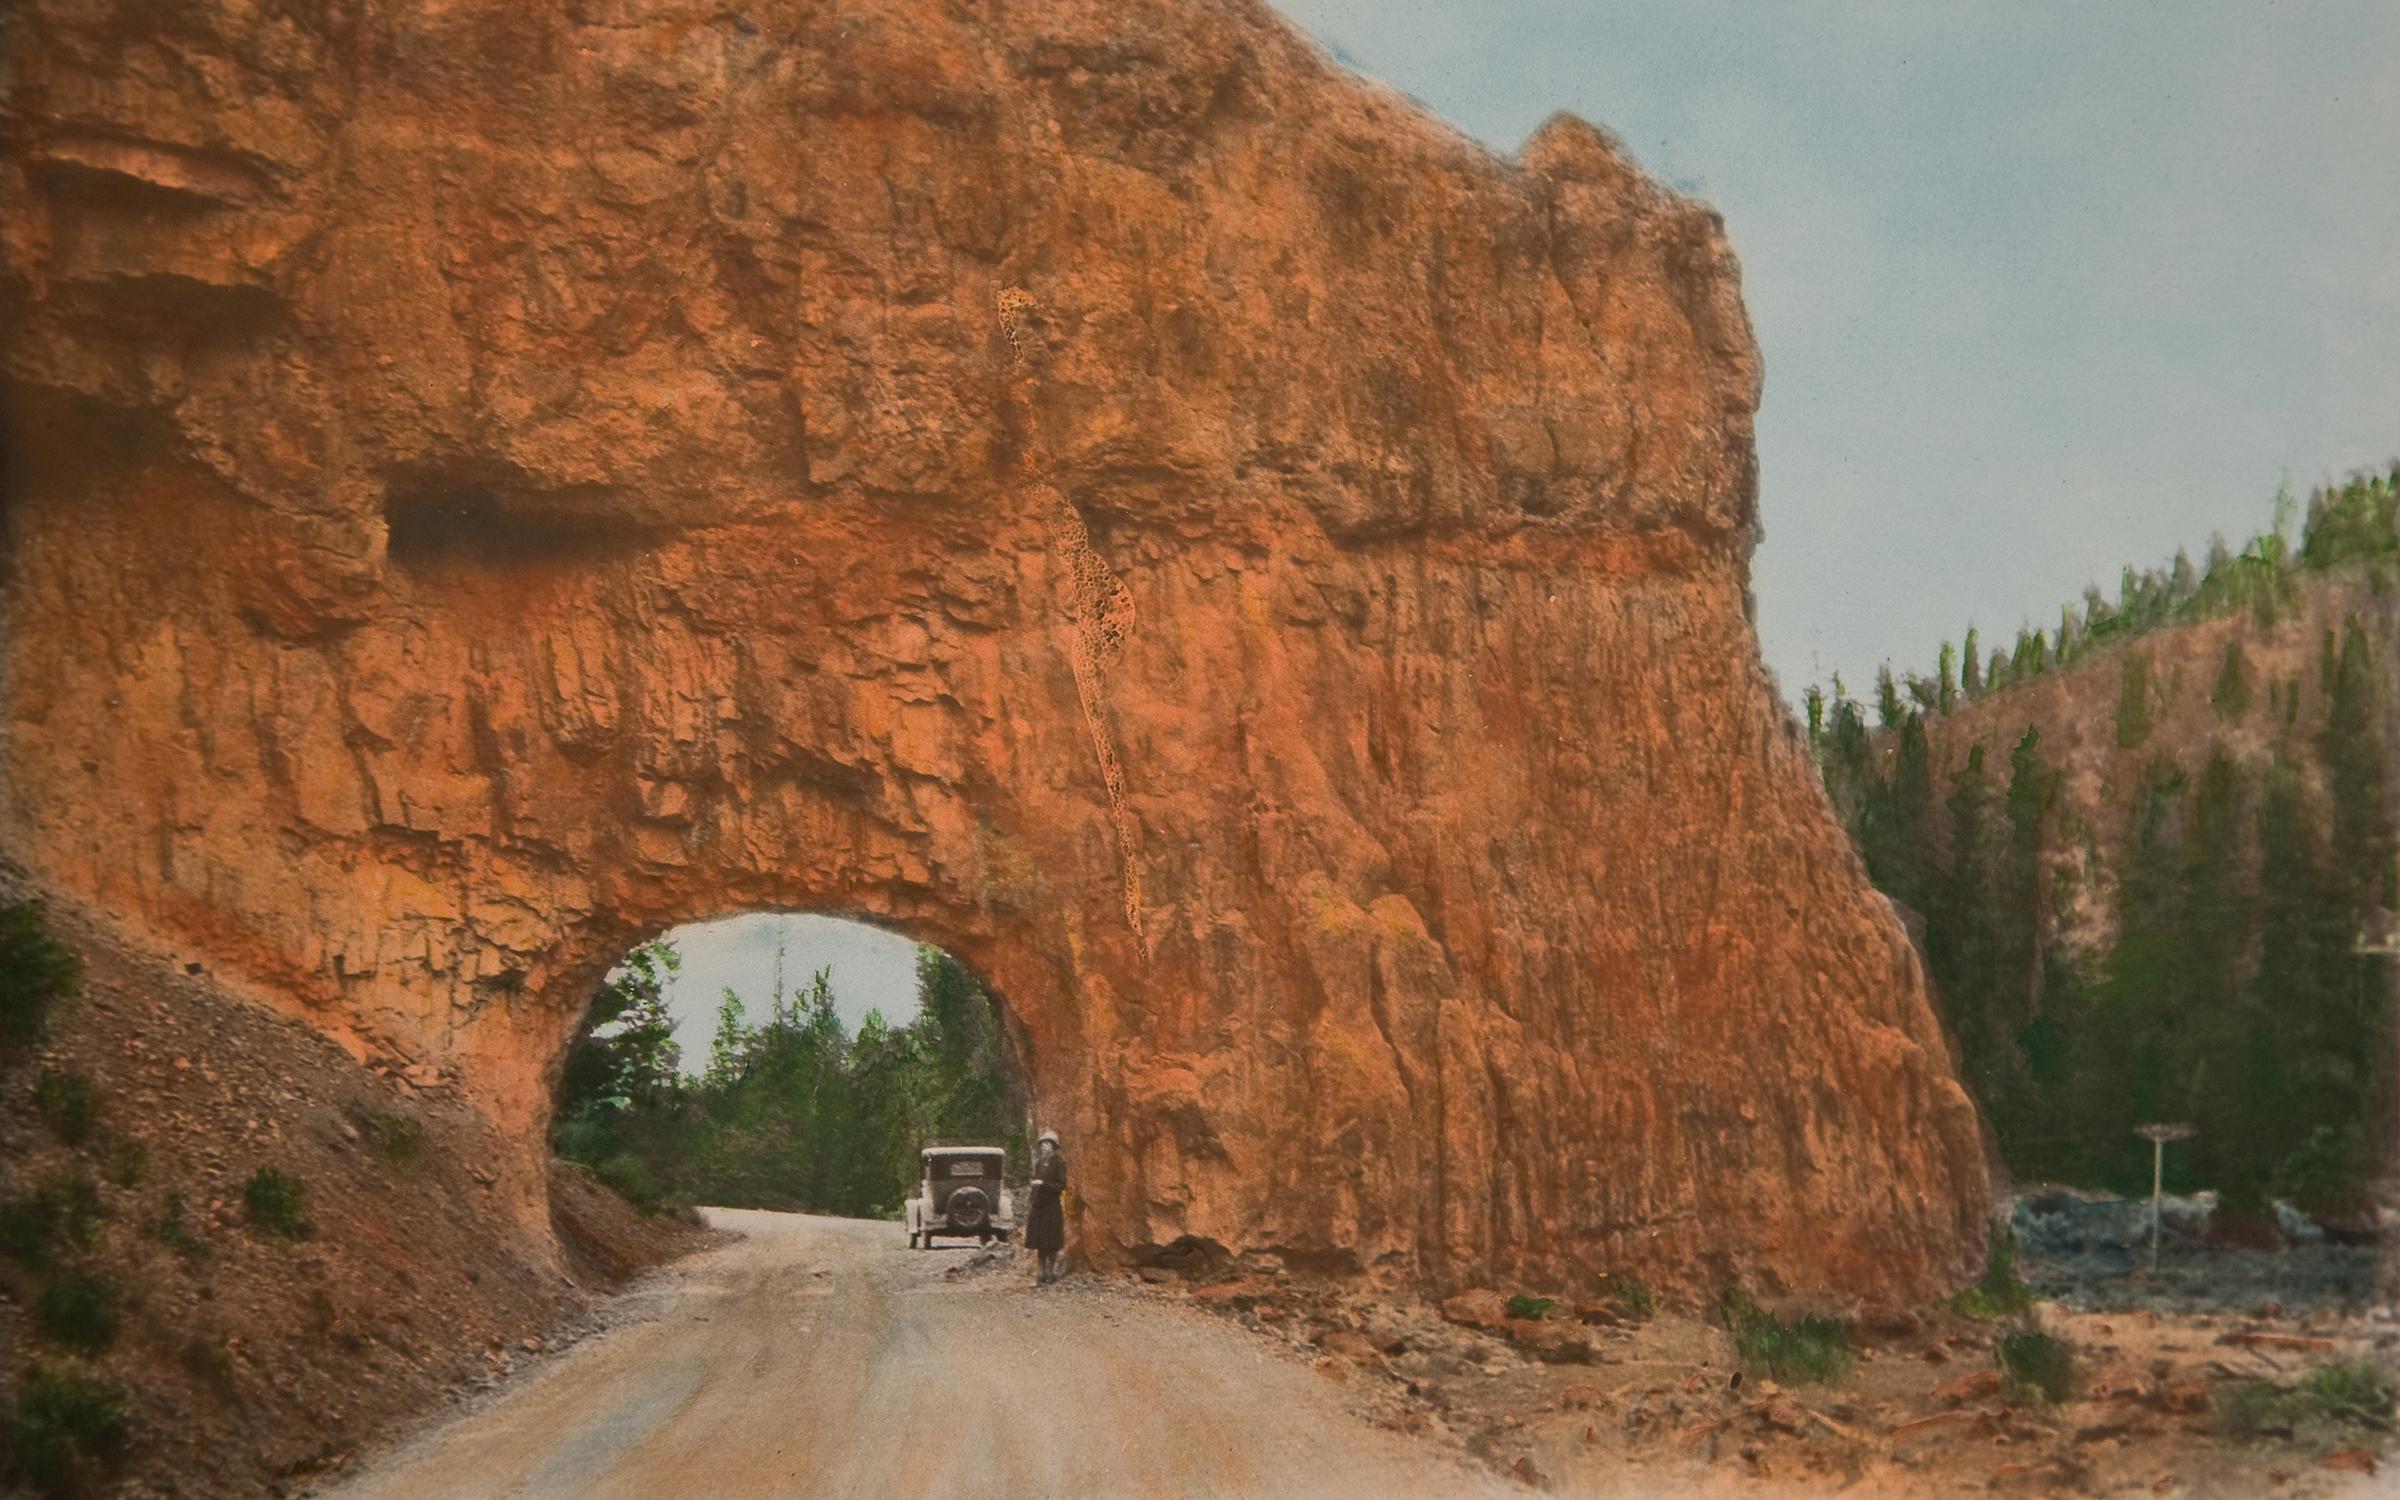 a vintage hand-colored photograph of a red rock wall with a woman and an old car standing in a cutout tunnel running through the wall